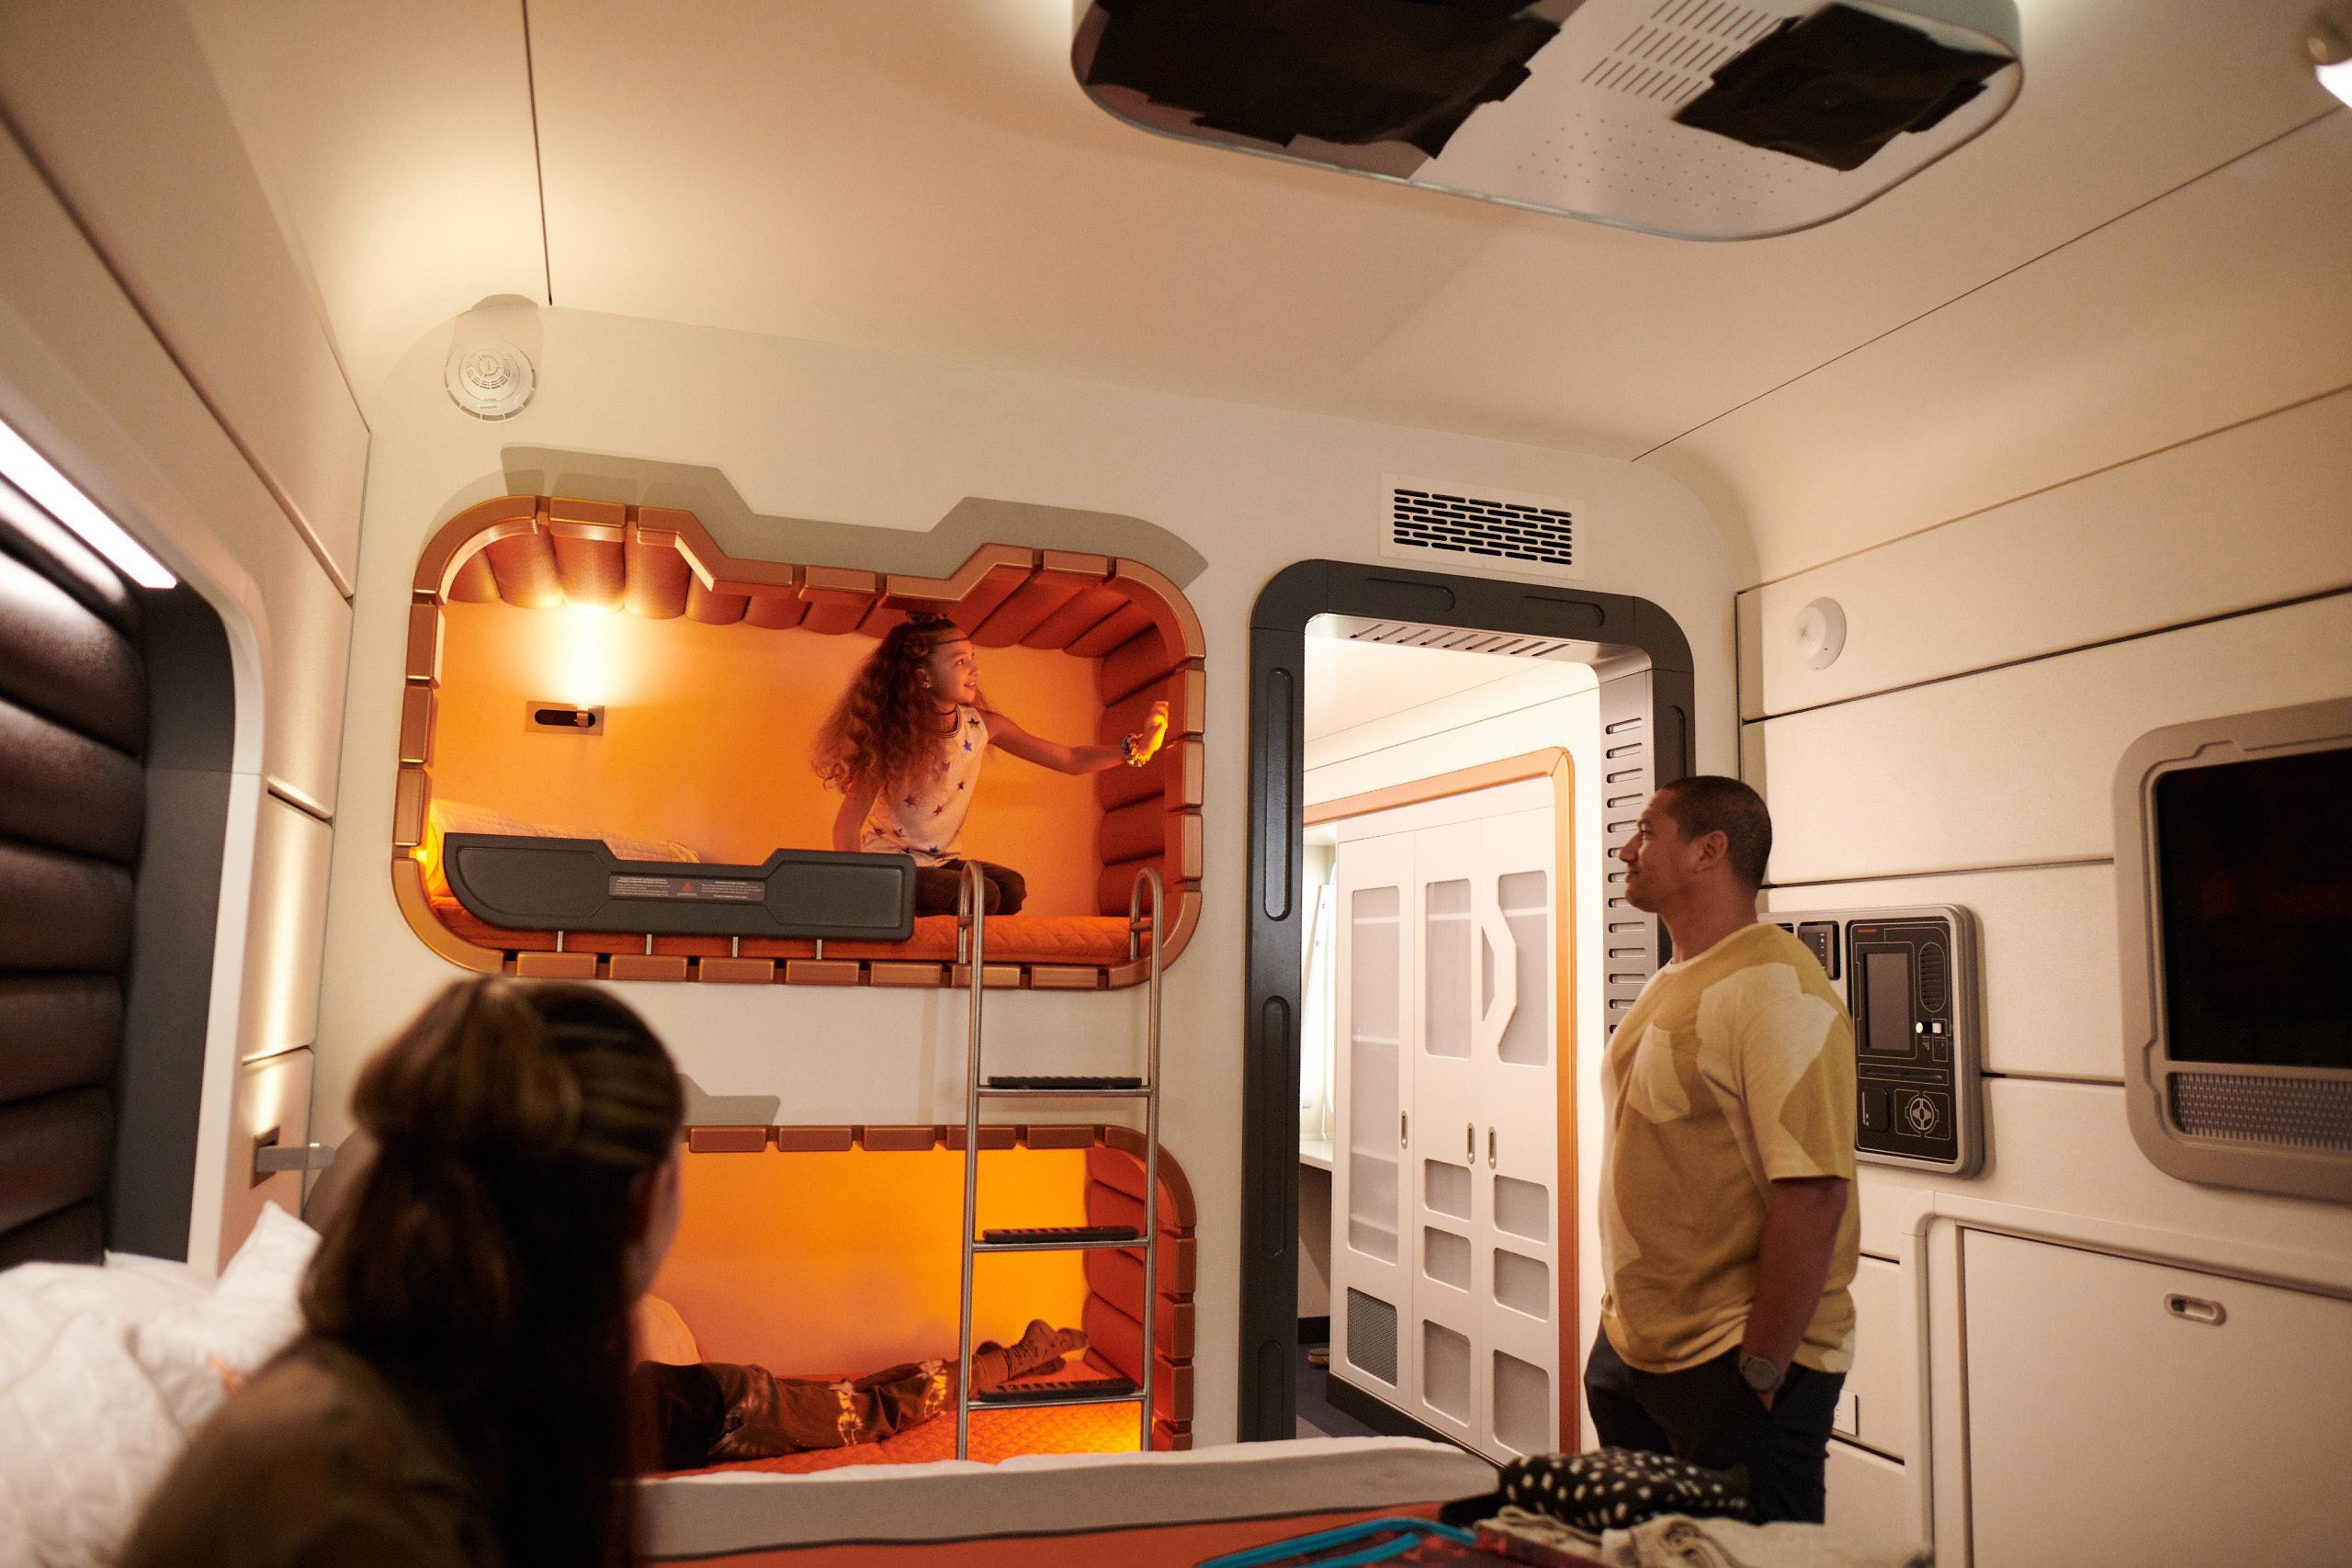 Rooms in the Galactic Starcruiser featured bunk-bed setups and no windows. 